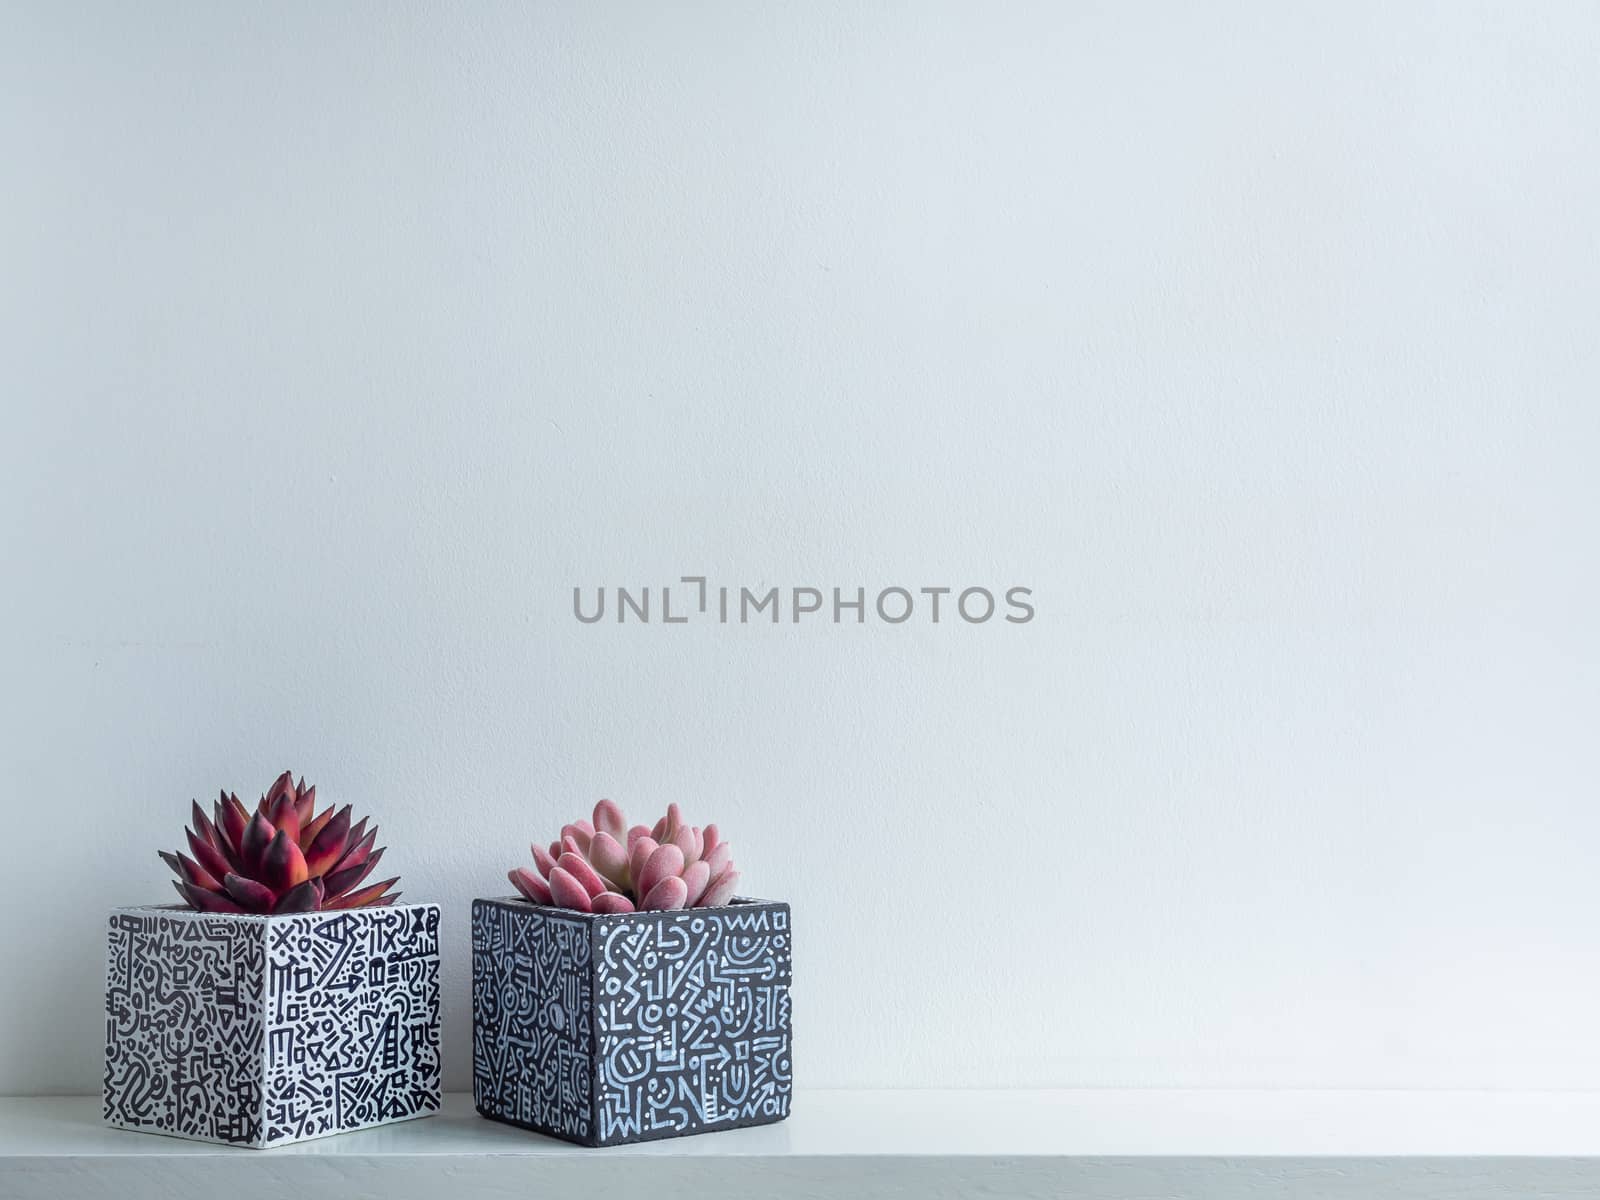 Cactus pot. Concrete pot. Empty white with modern graphic pattern geometric concrete planters with succulent plants on white wooden shelf isolated on white wall background with copy space.